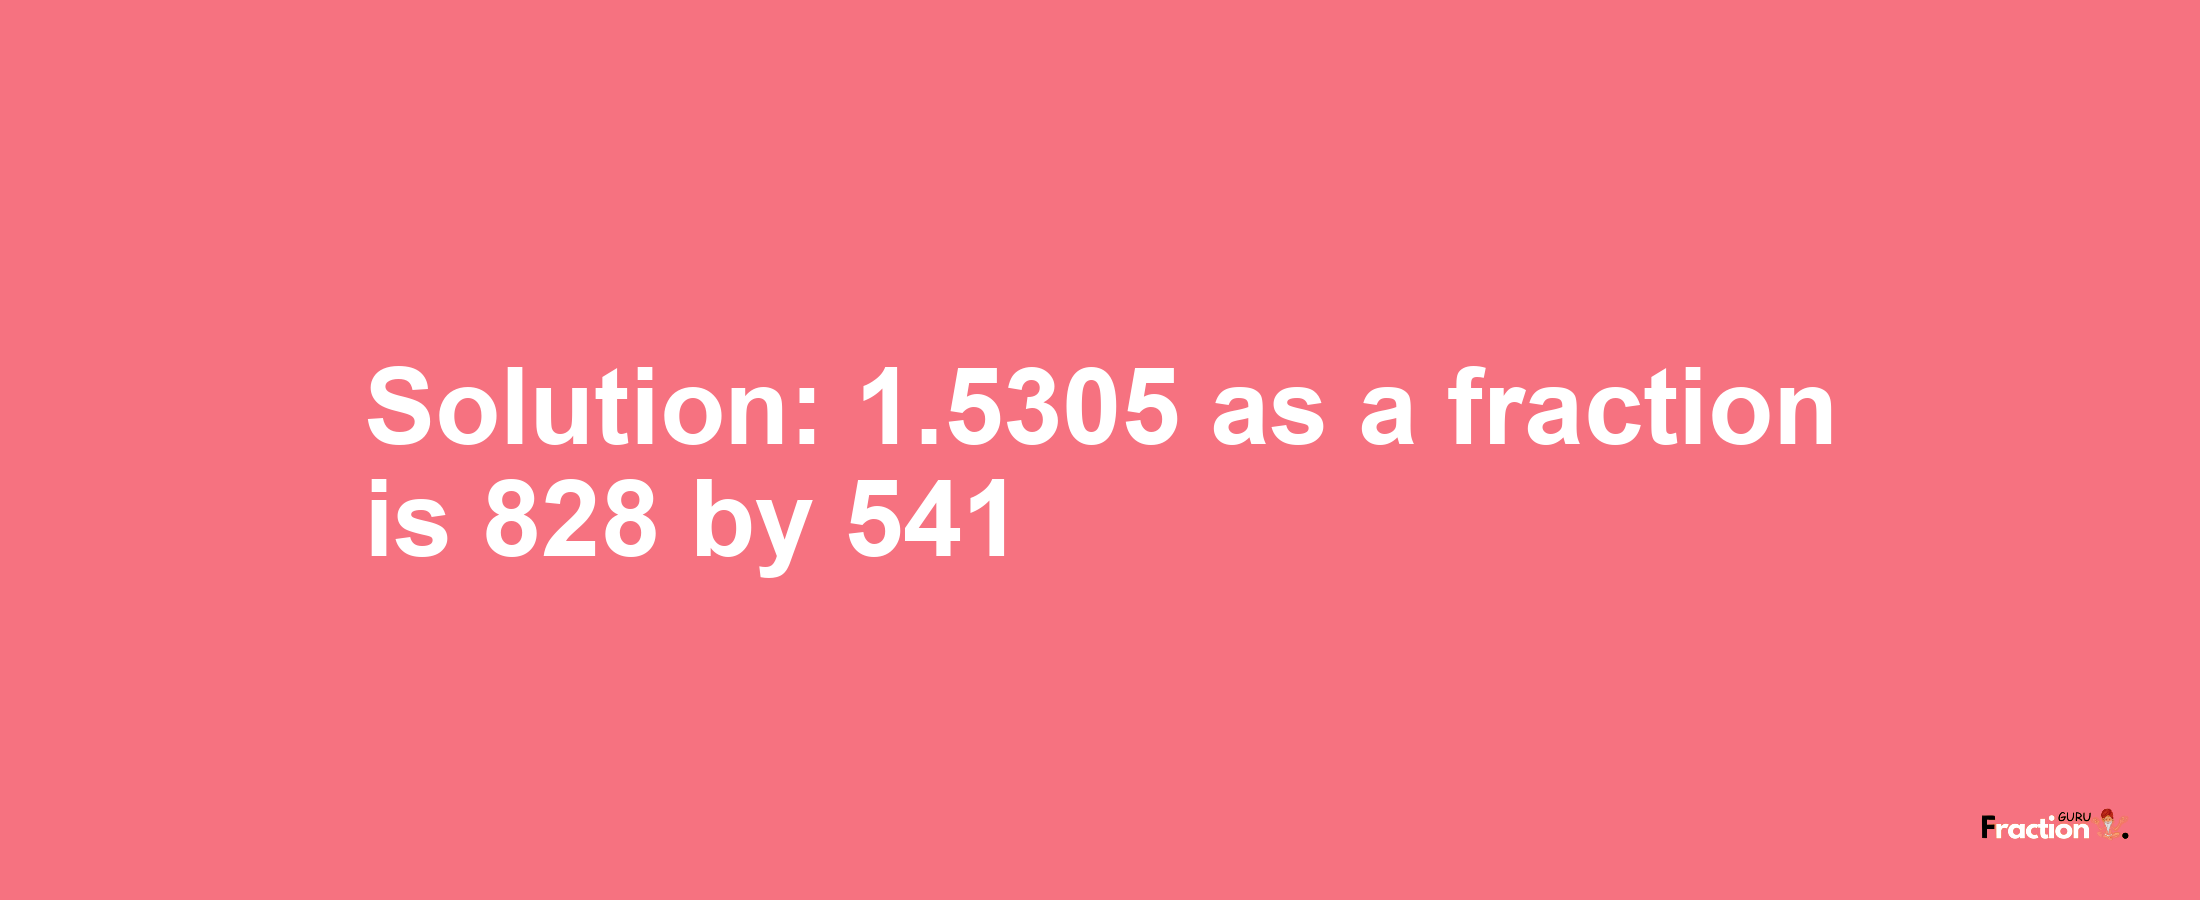 Solution:1.5305 as a fraction is 828/541